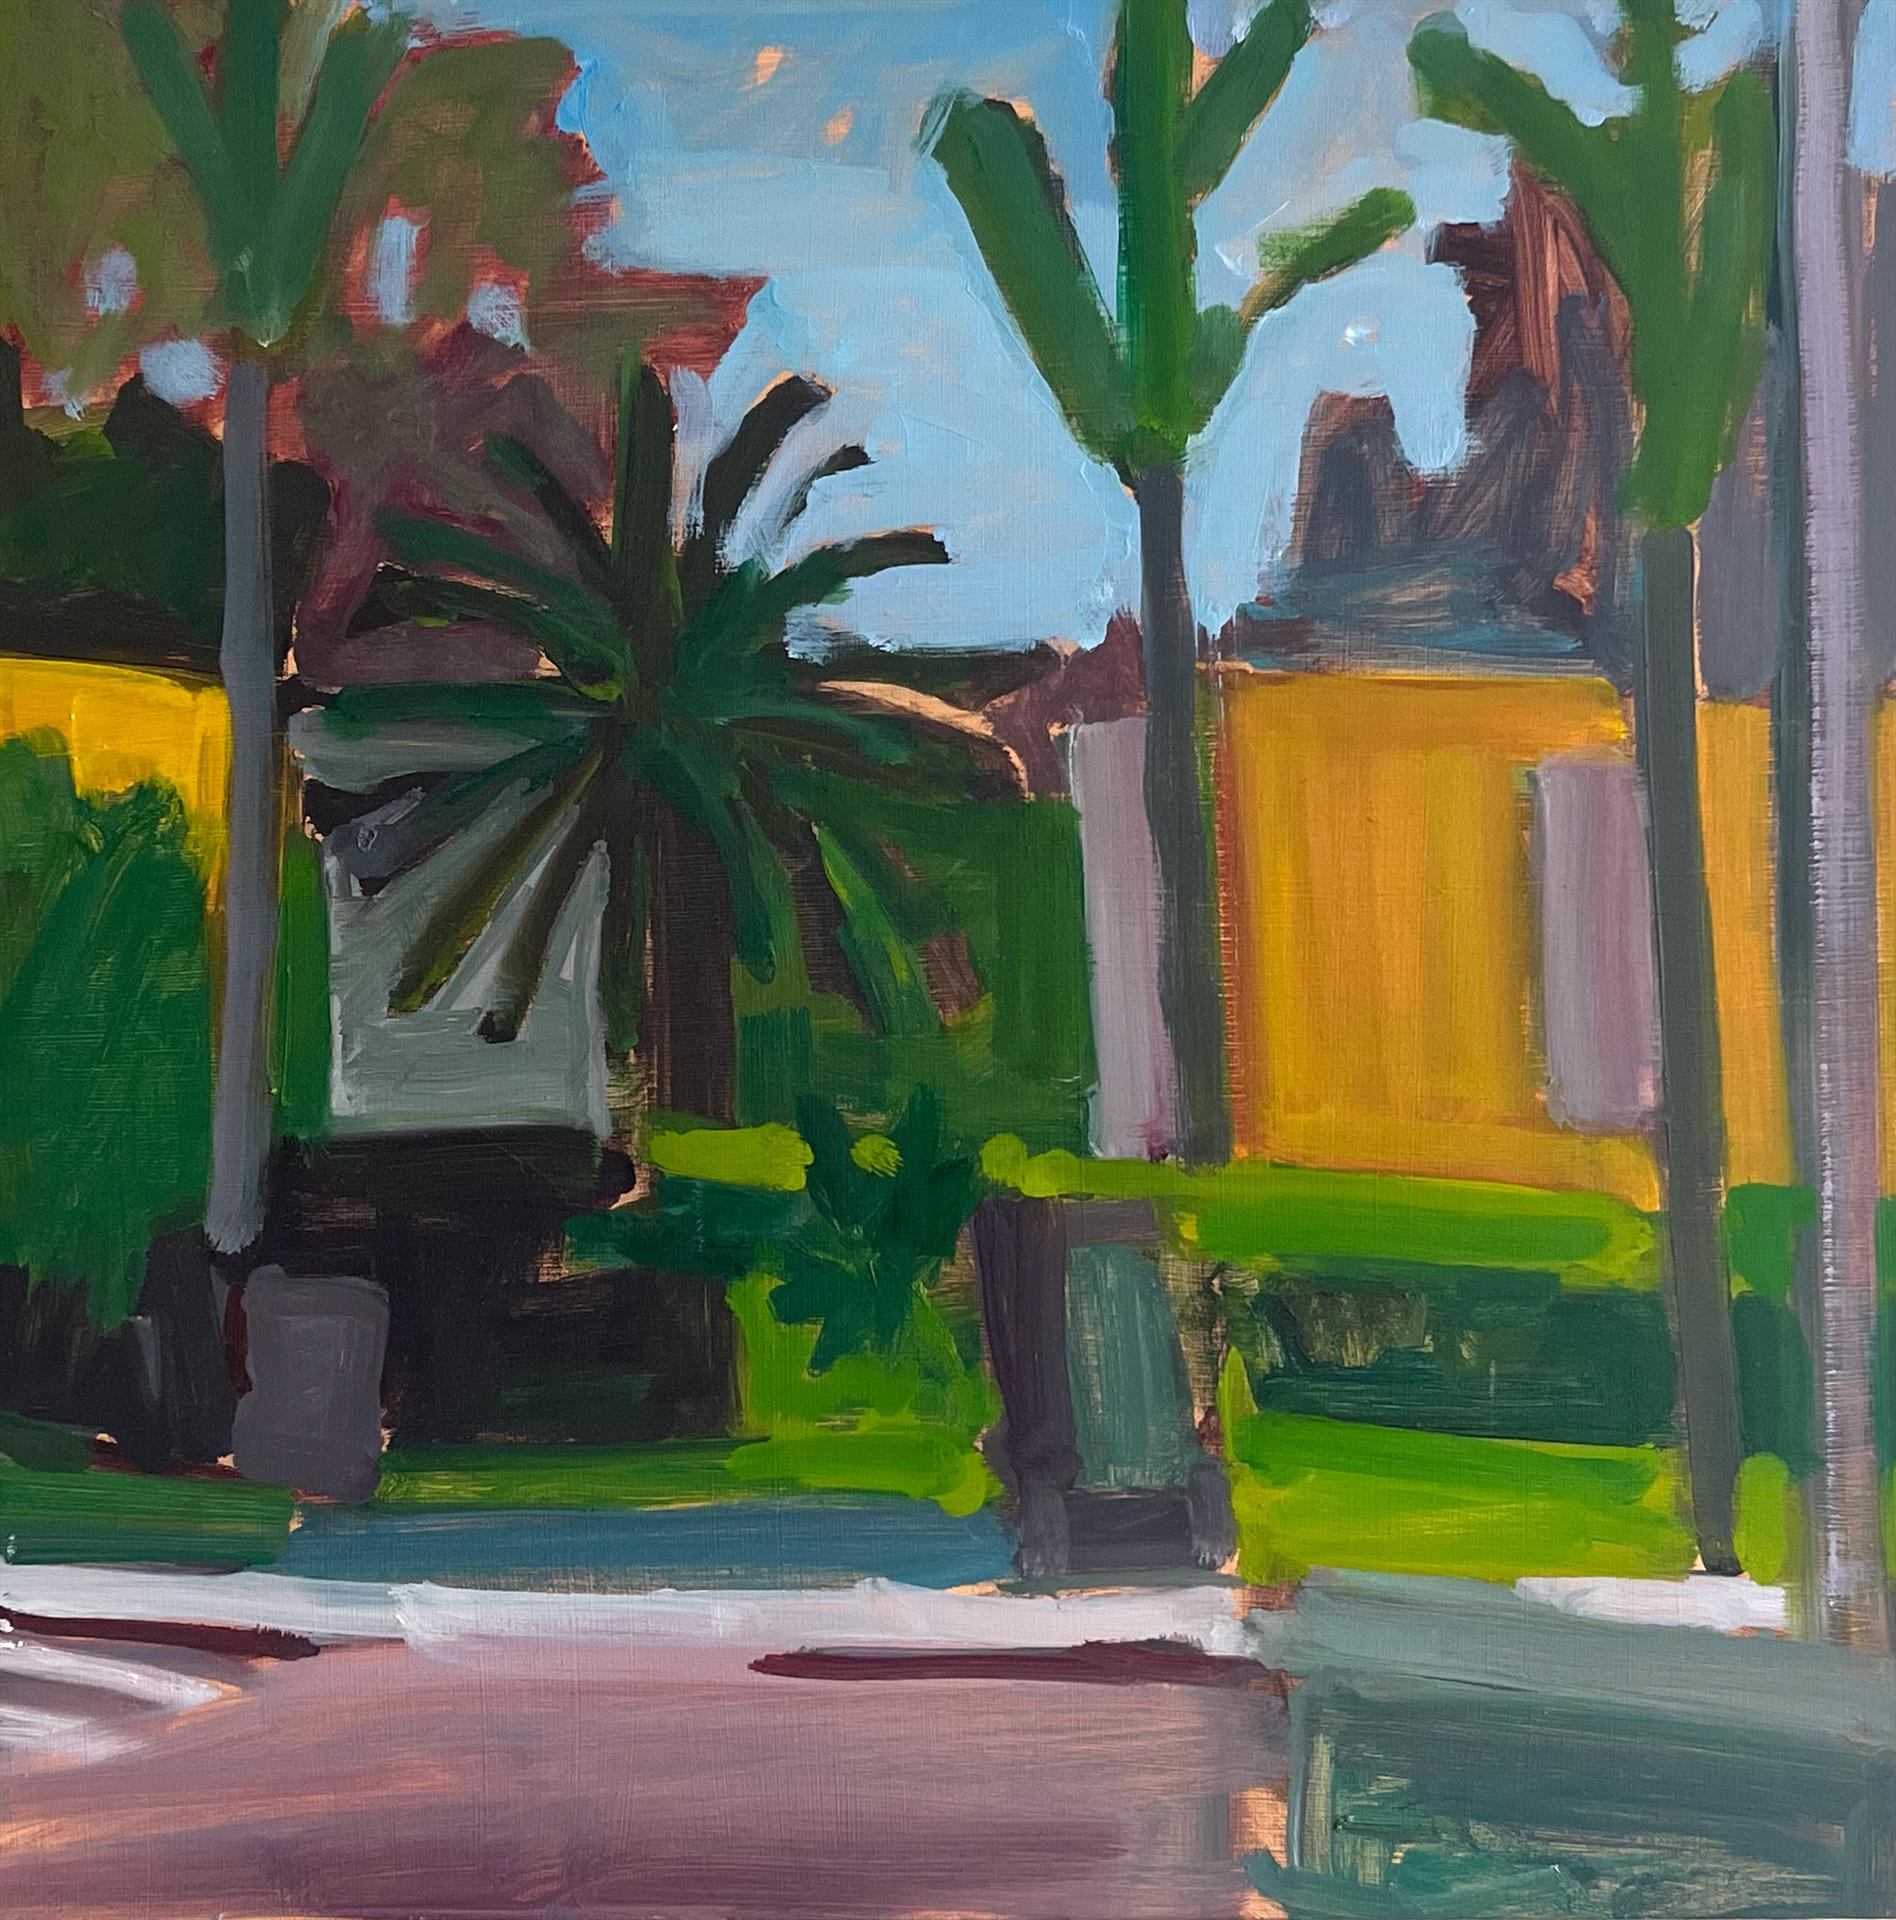 Kevin Inman, West Point Loma Blvd. Oil, 16x16.